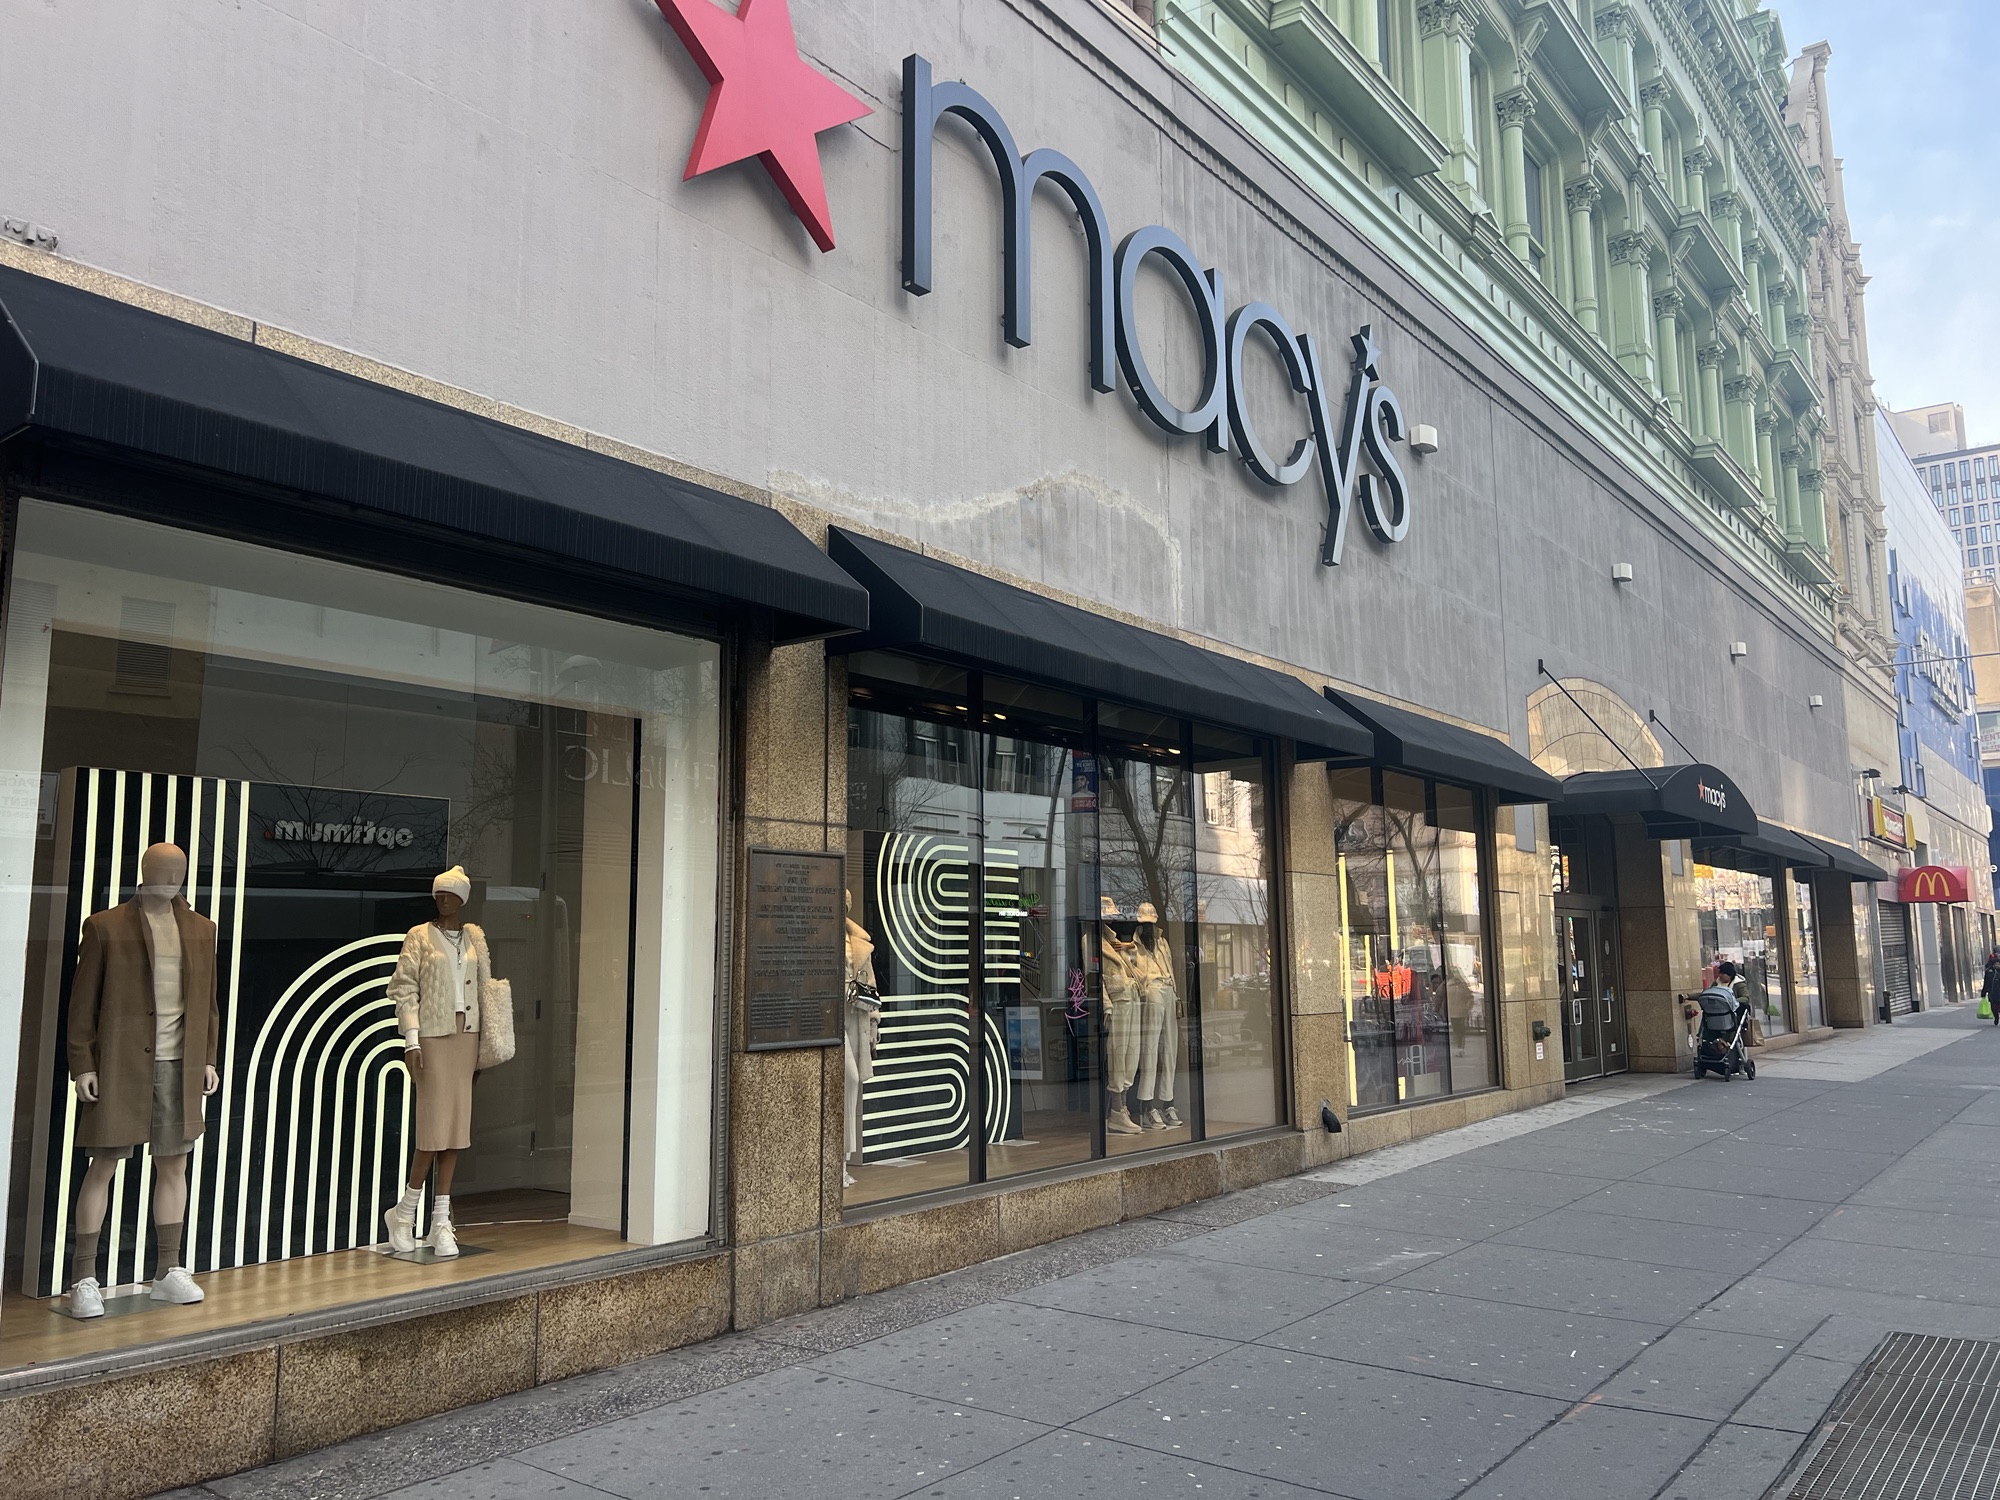 Macy’s to close 150 stores and pivot to luxury boutiques as retailer looks to regain slumping sales